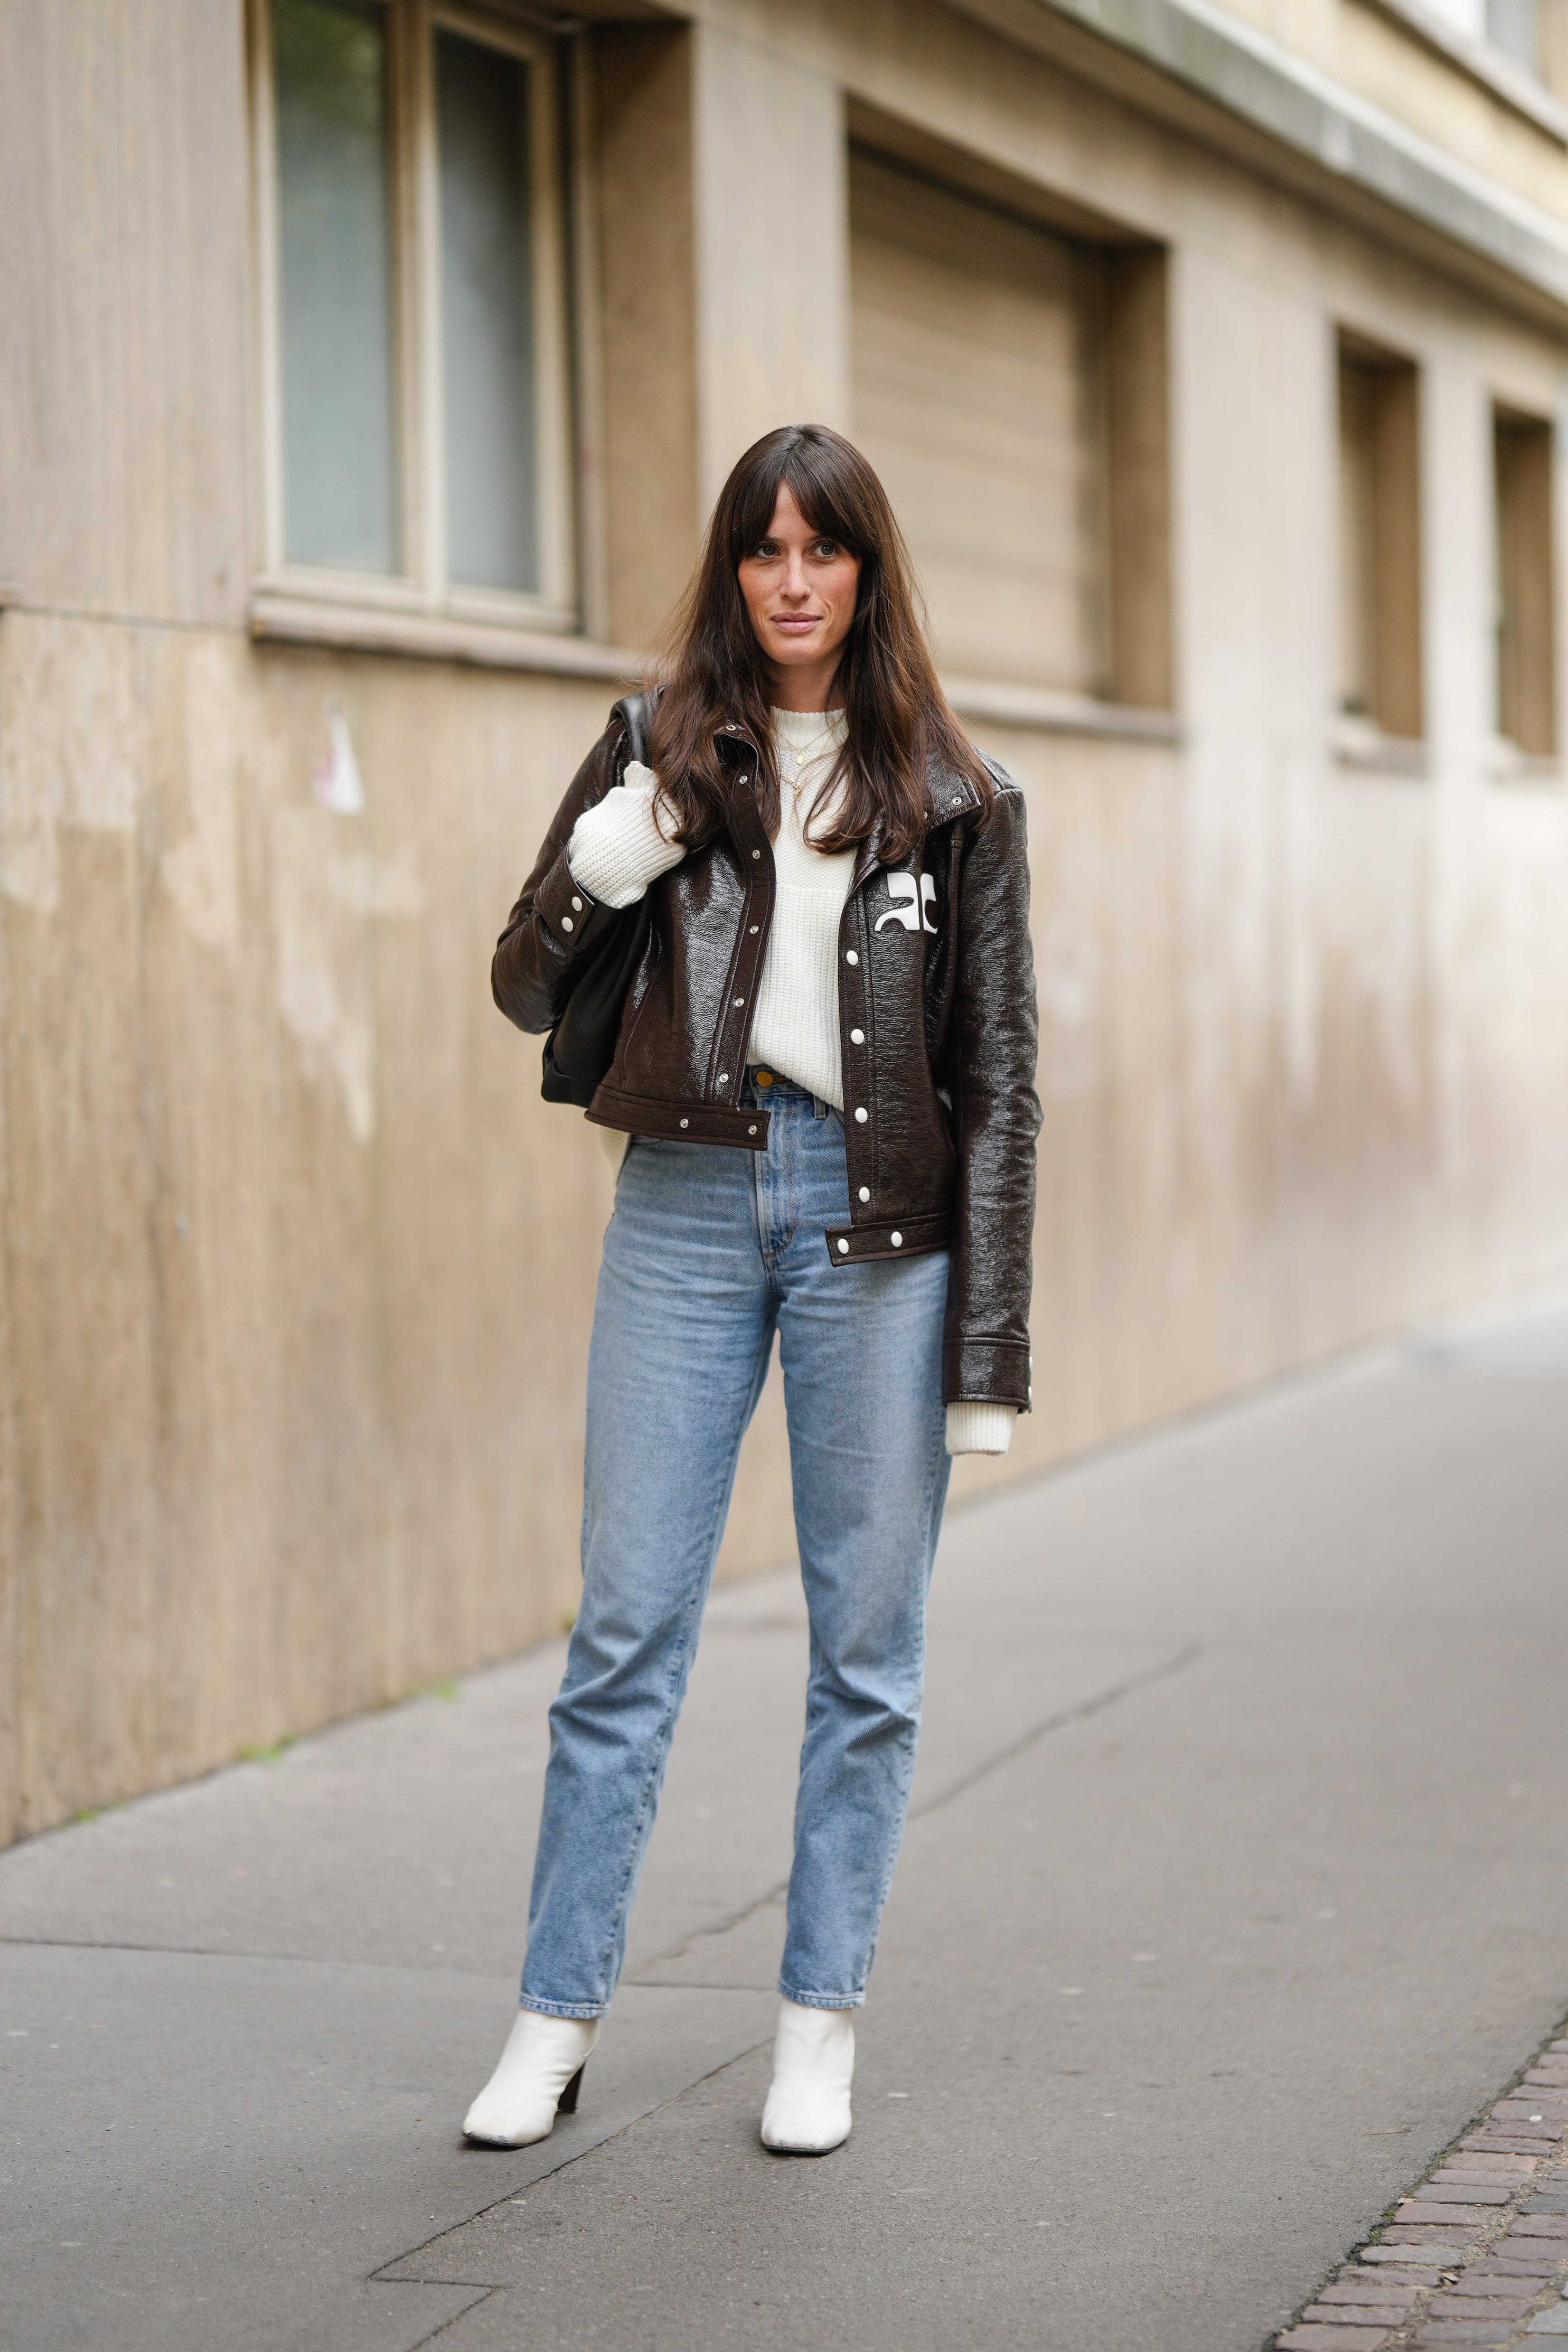 How To Wear Flat Ankle Boots With Jeans In 2022 - ljanestyle